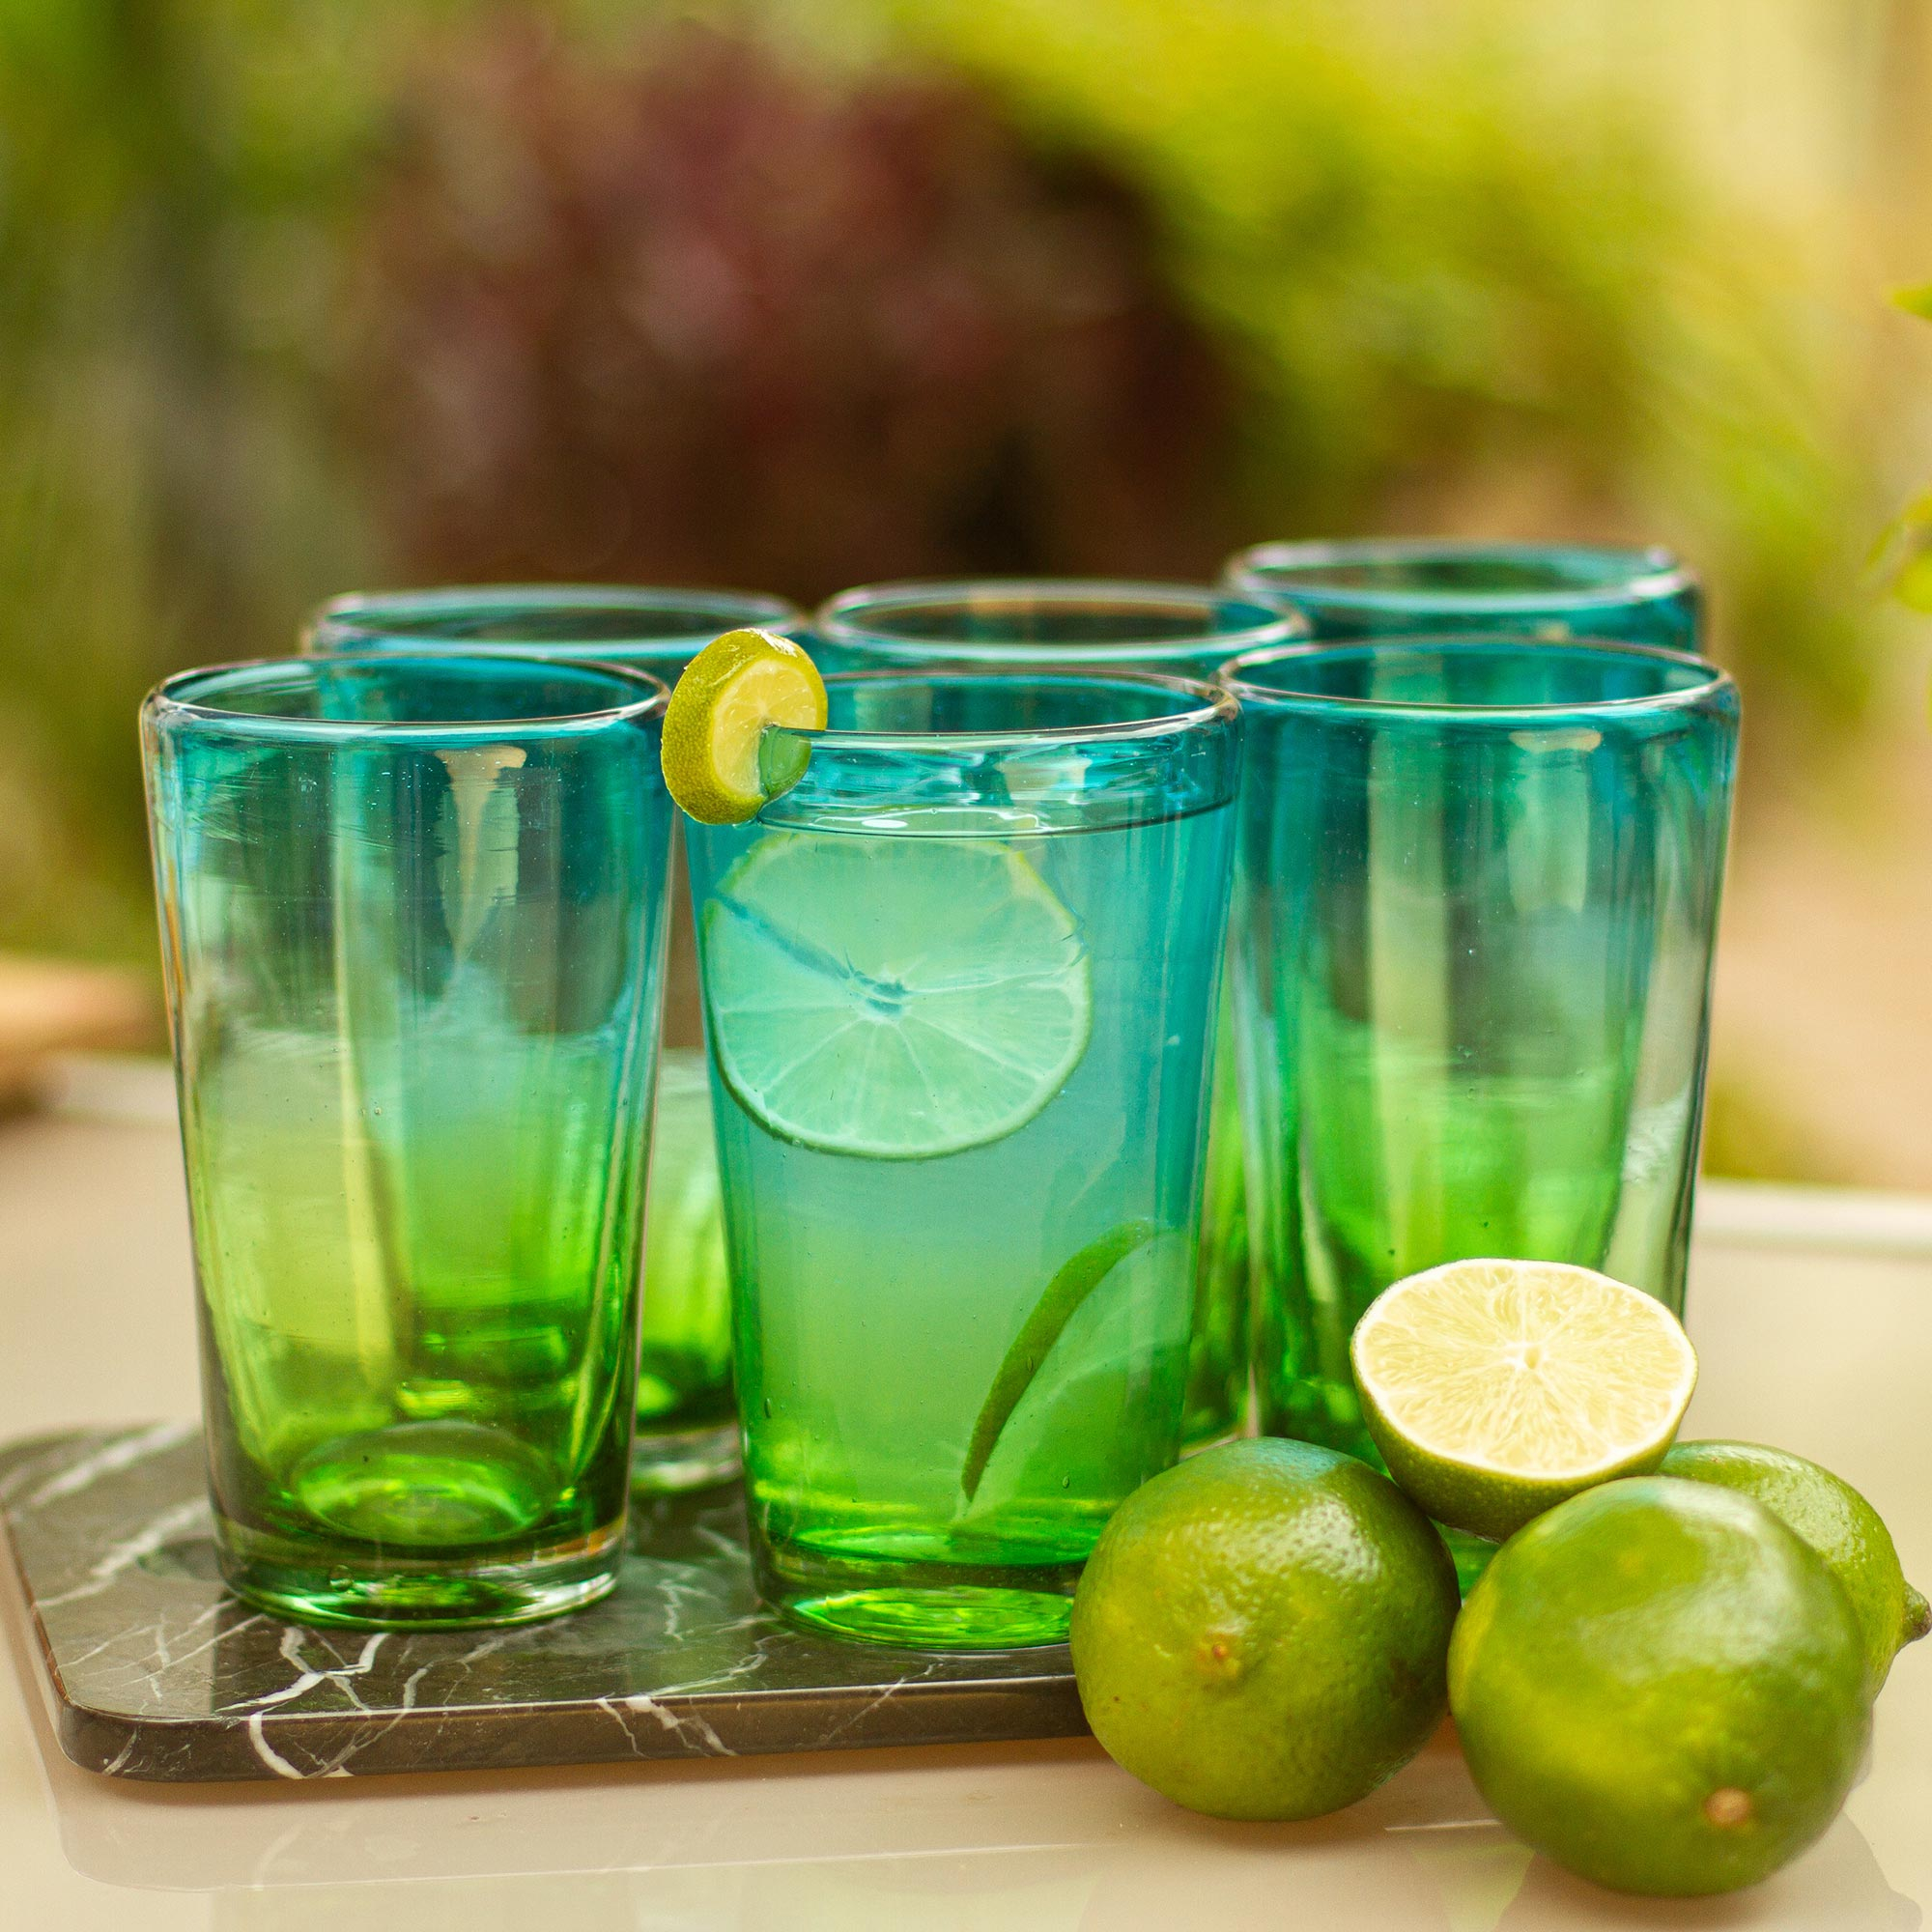 Aurora Tapatia NOVICA Hand Blown Recycled Glass Blue and Green Ombre Highball Glasses 15 oz set of 6 